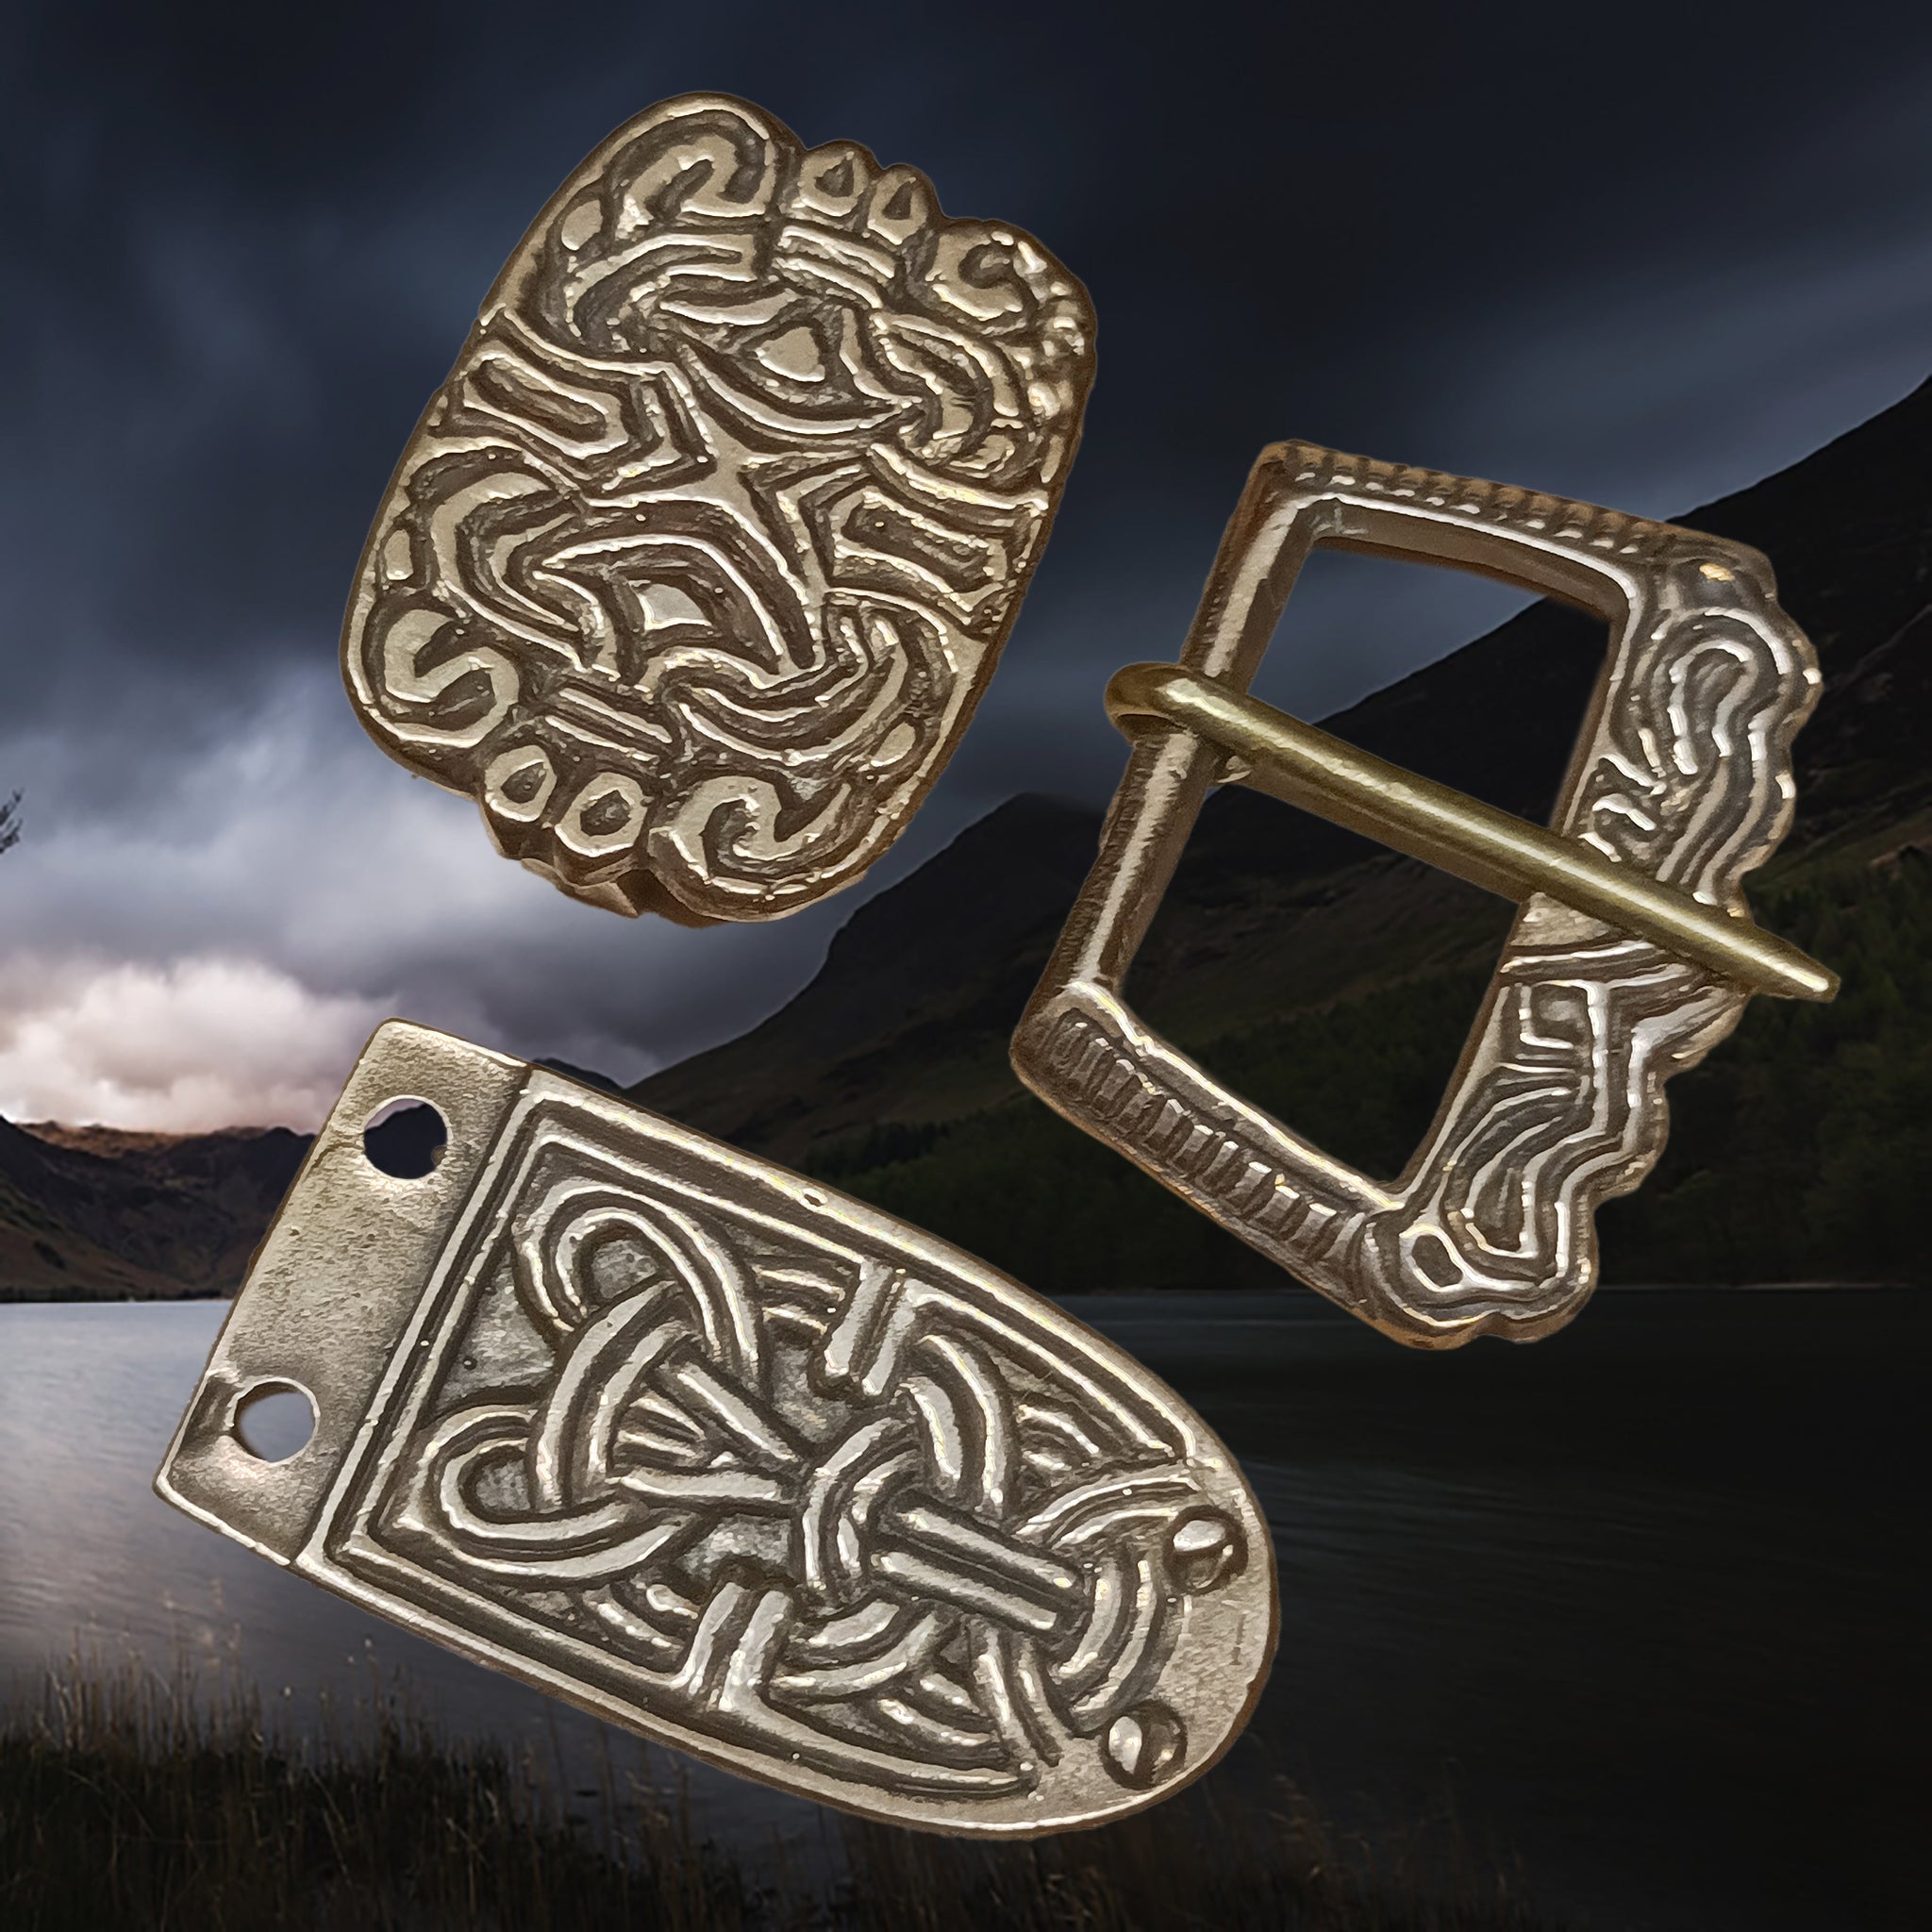 Replica Viking Buckle, Strap End &amp; Slider in Solid Bronze in the Norwegian Borre Style